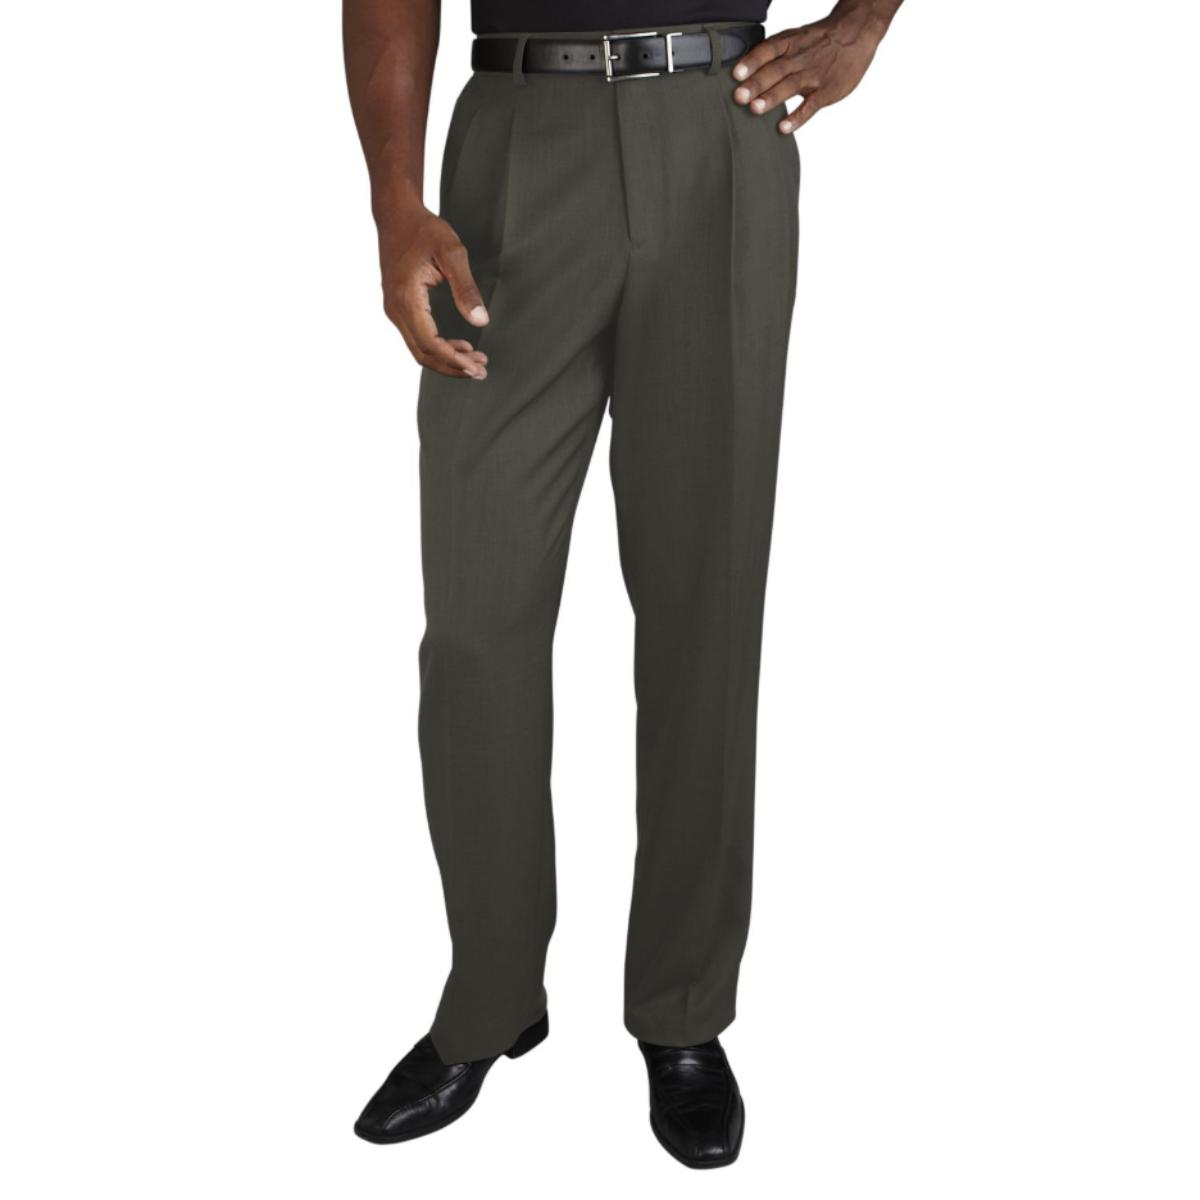 Charcoal Grey Male Housekeeping Pant - Front